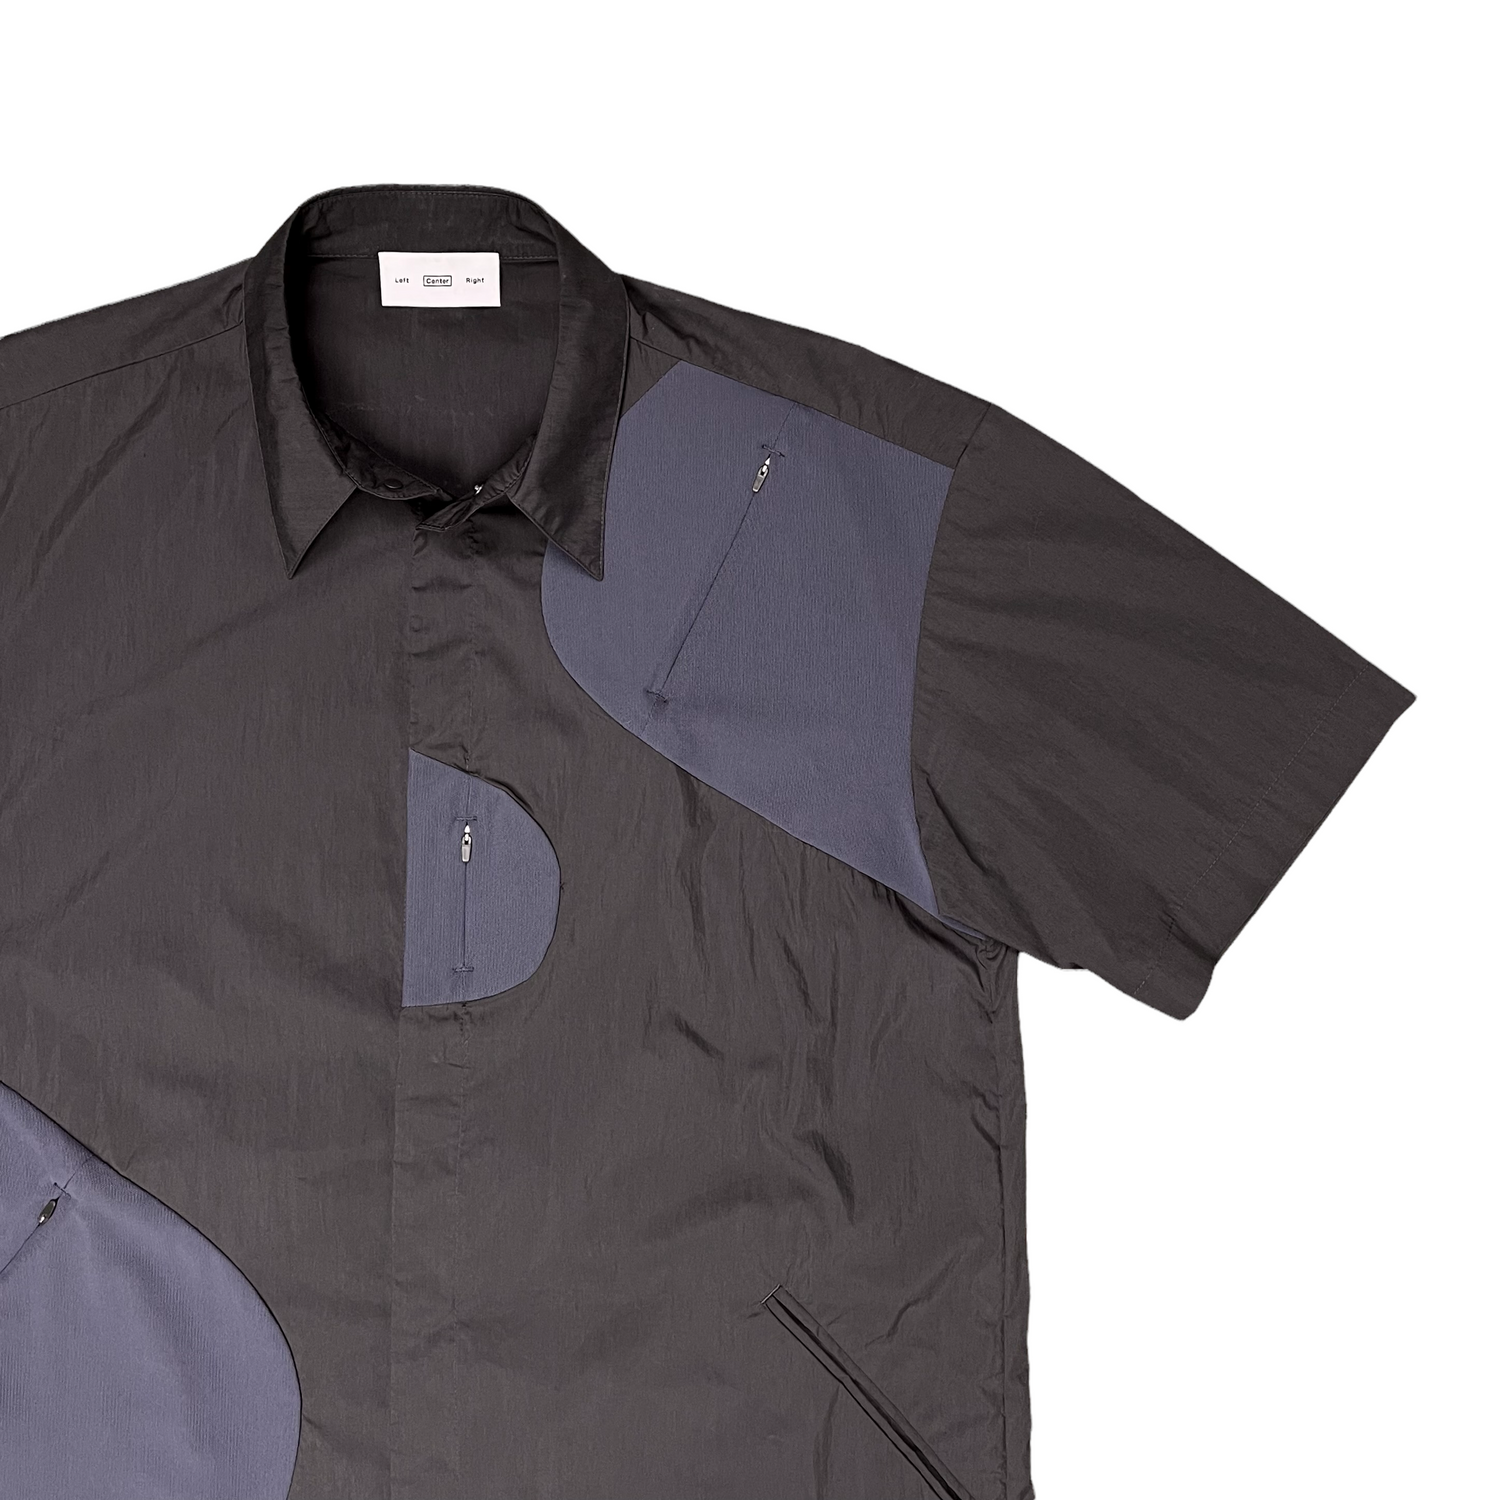 Post Archive Faction 4.0 Center Shirt Brown - SS21 – Vertical Rags